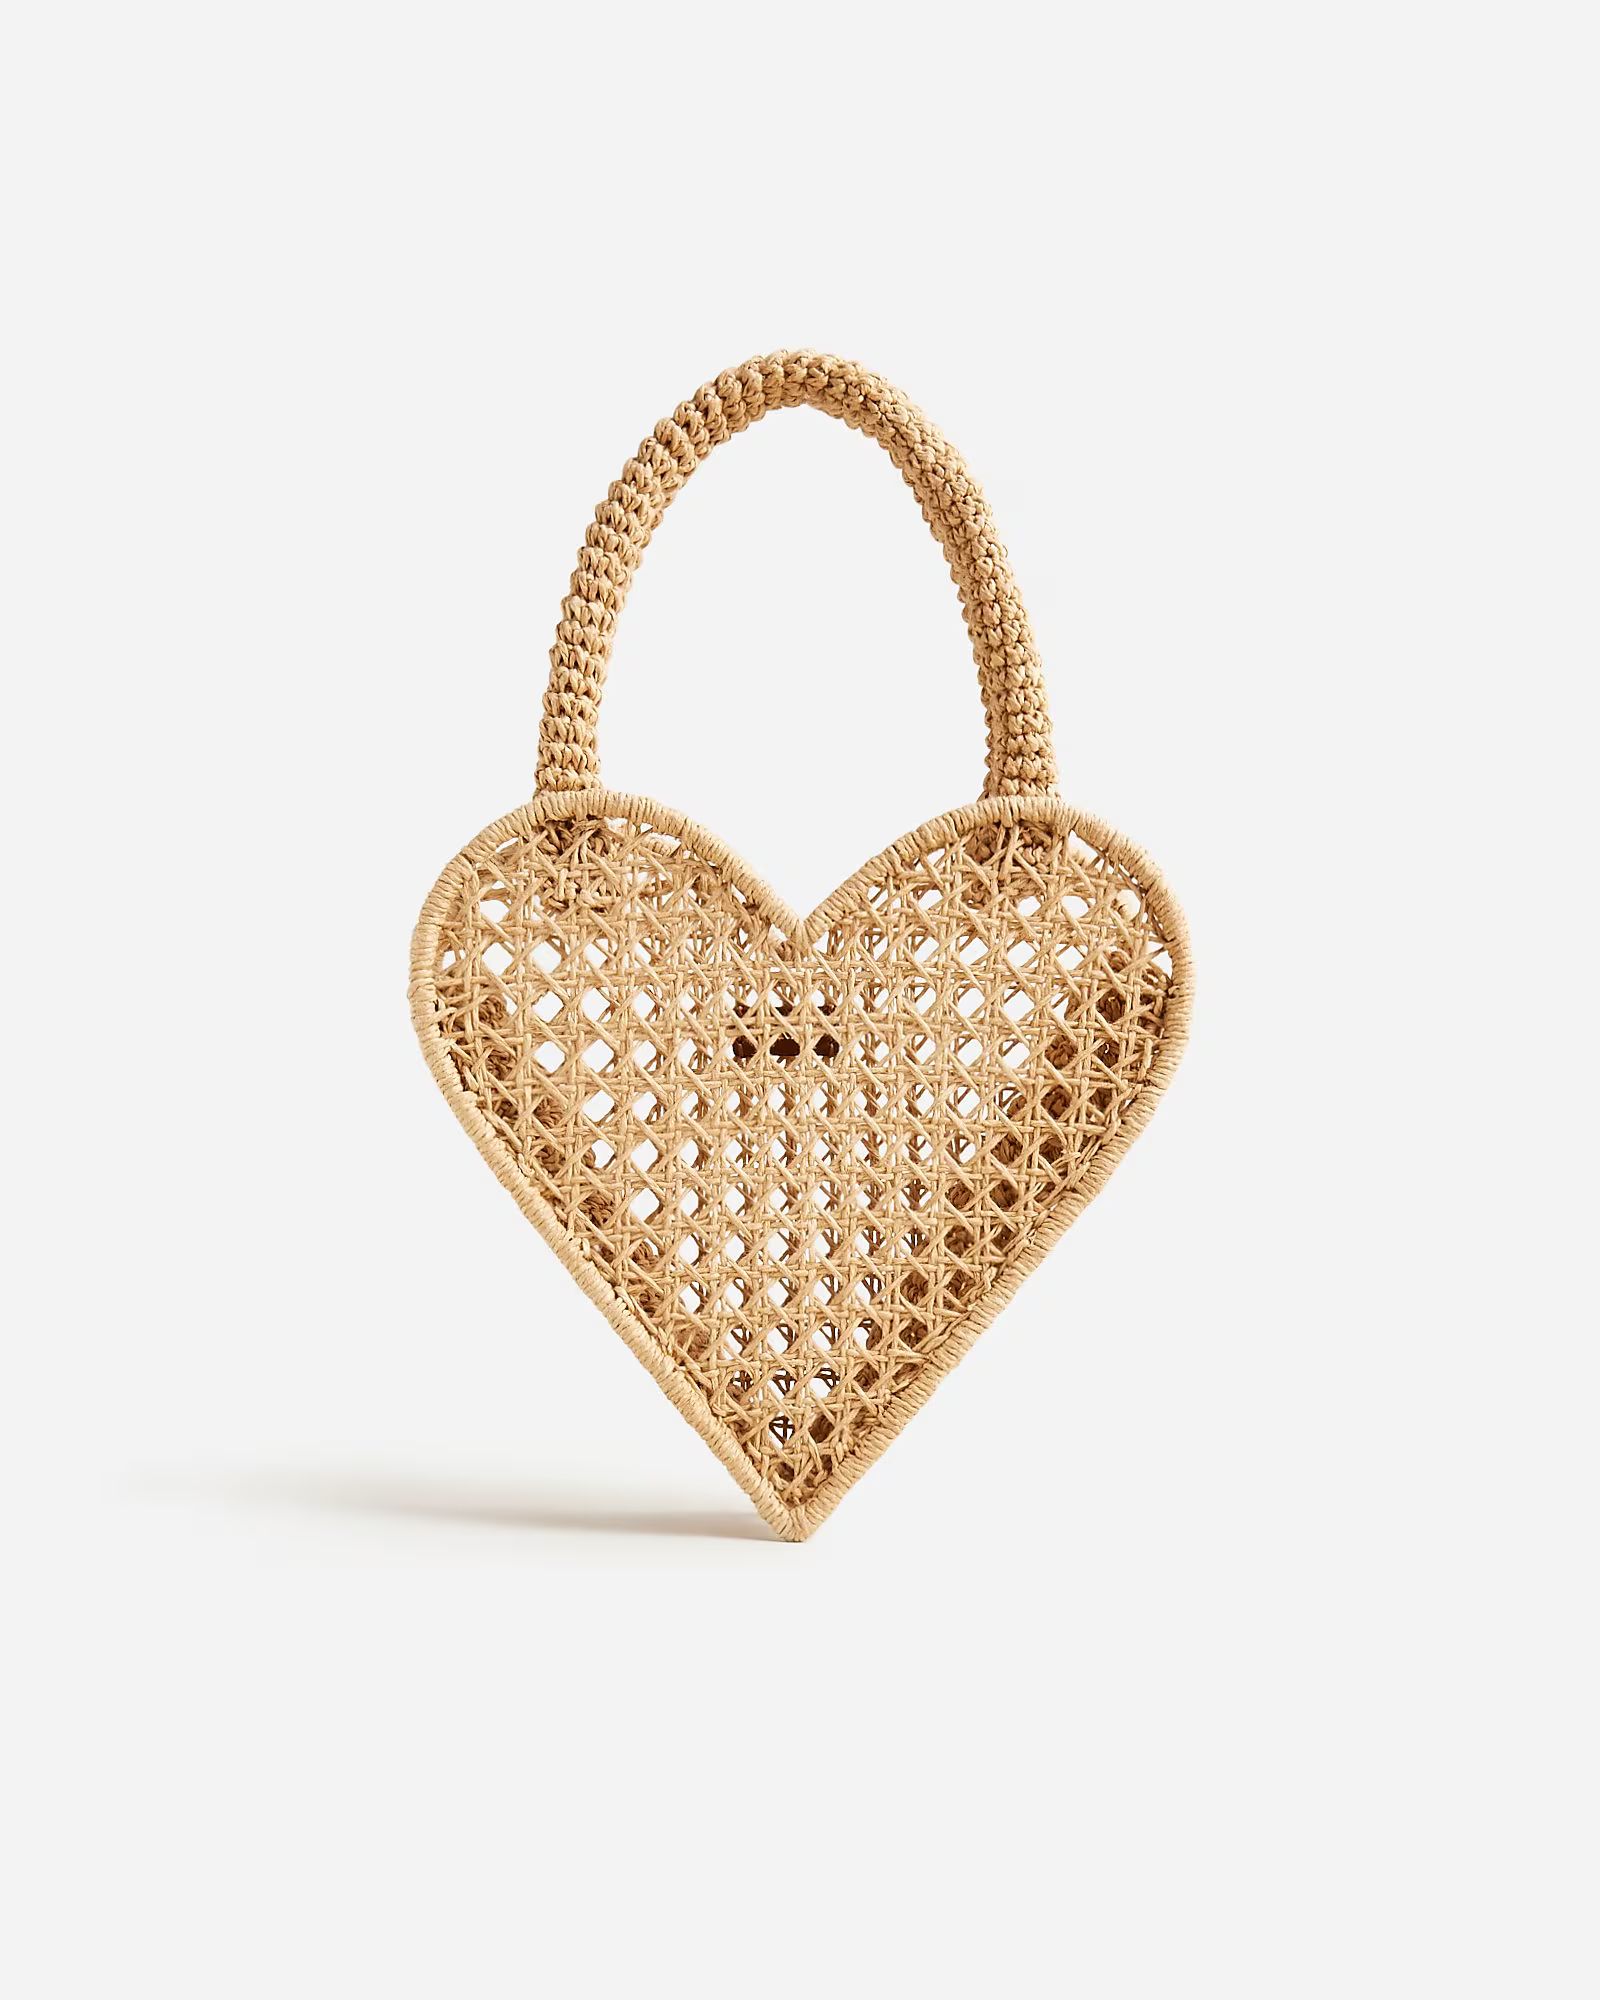 new5.0(1 REVIEWS)Small heart straw bag$98.0030% off full price with code SHOP30NaturalOne SizeSiz... | J.Crew US